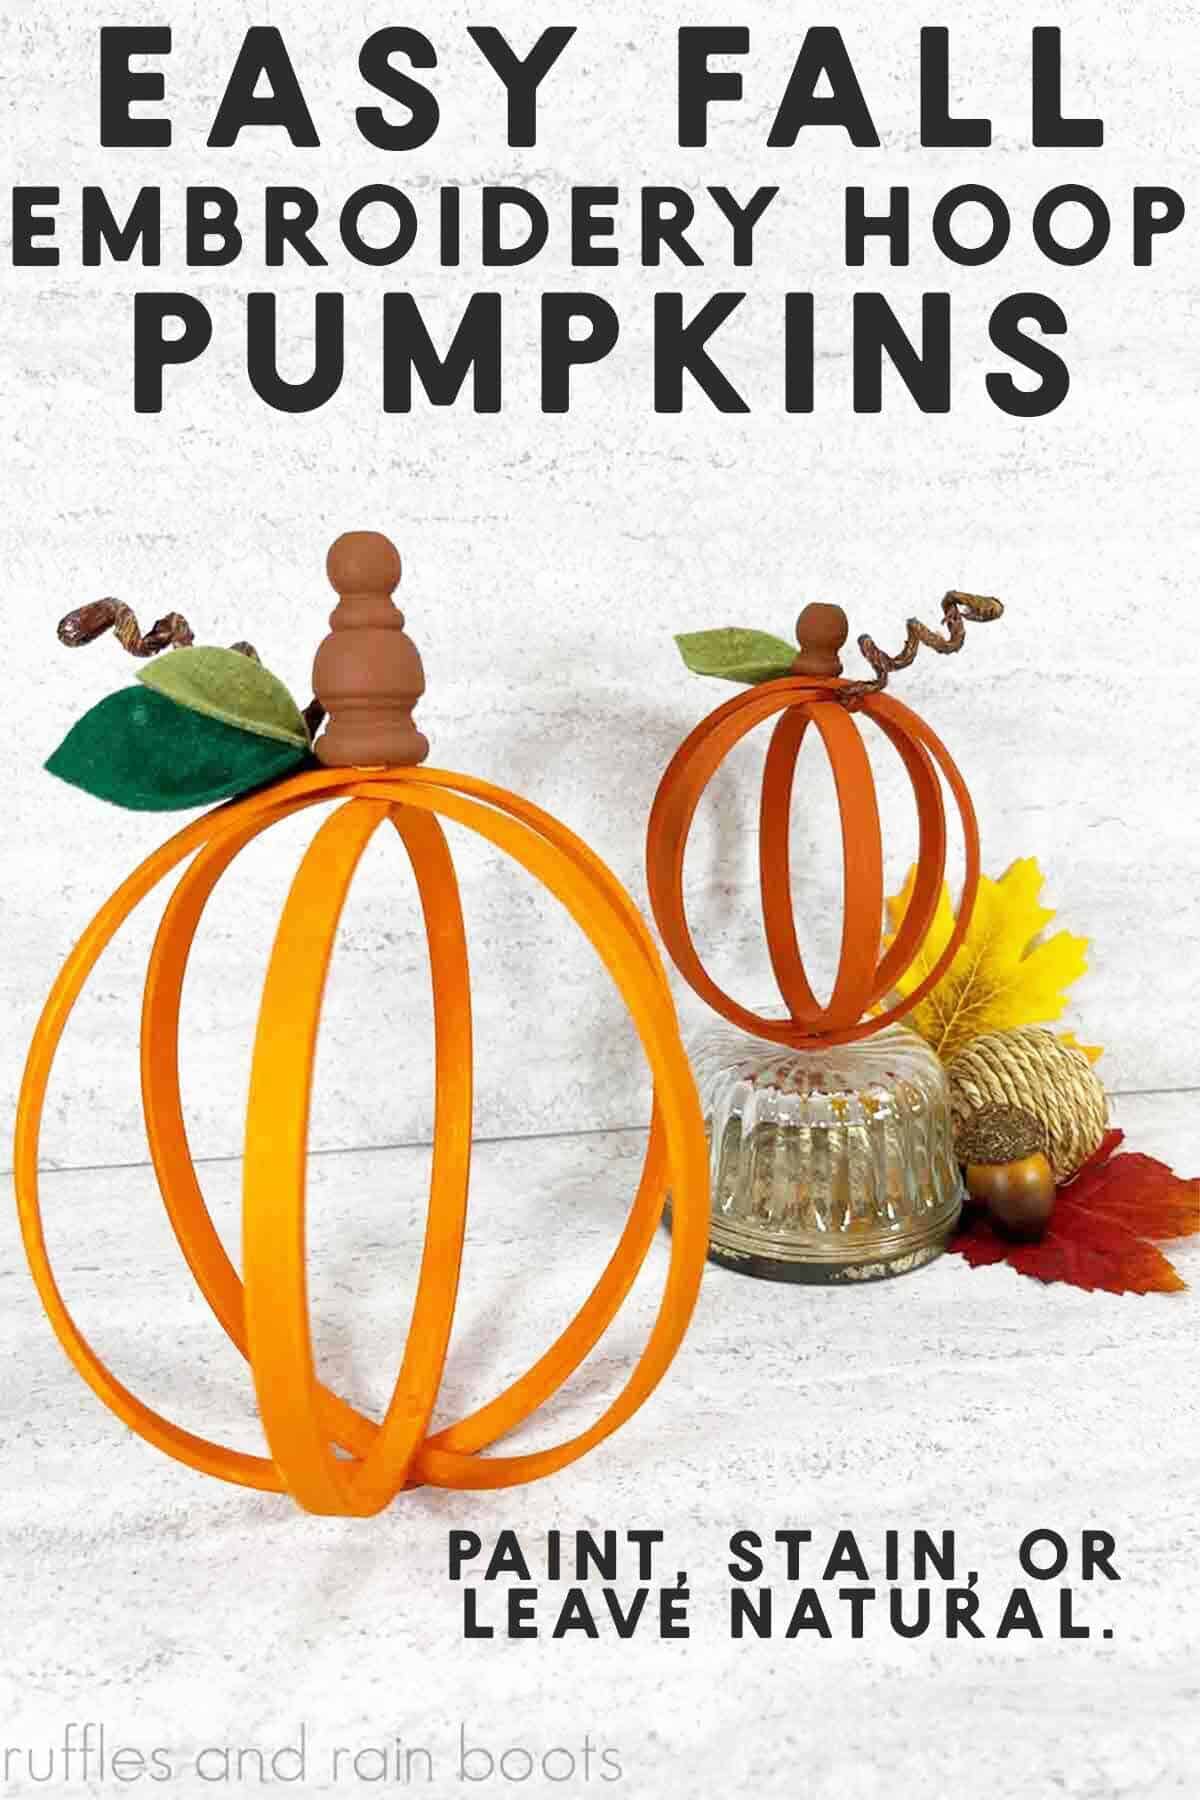 DIY pumpkin craft for farmhouse decor with text which reads easy fall embroidery hoop pumpkins.